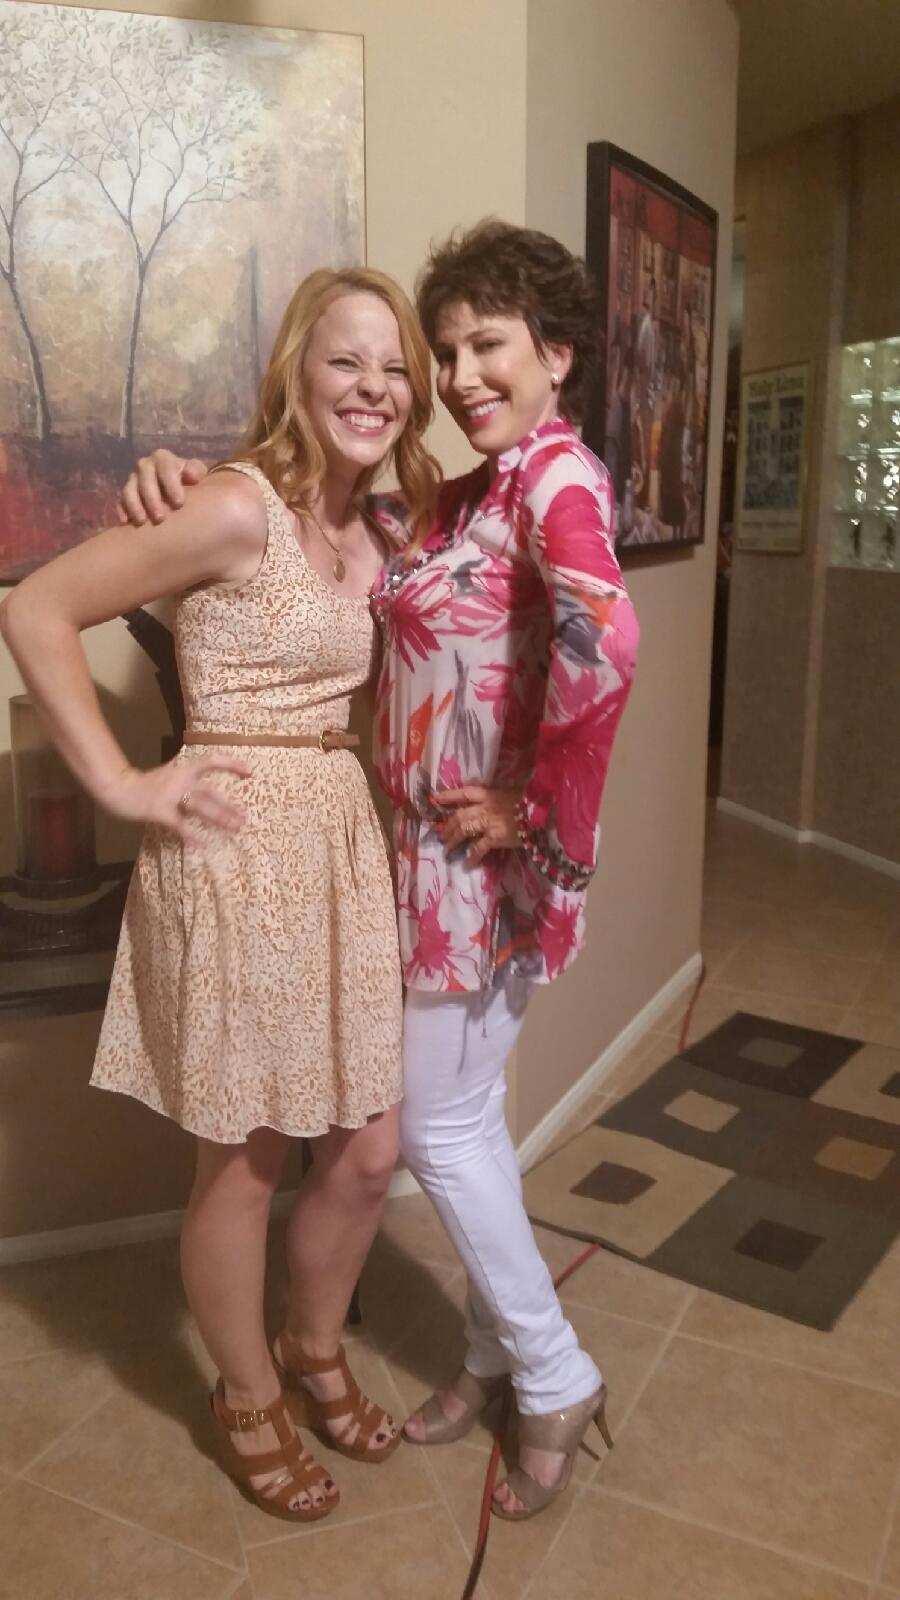 On the set of Holiday Breakup, Katie Leclerc and Diane Robin